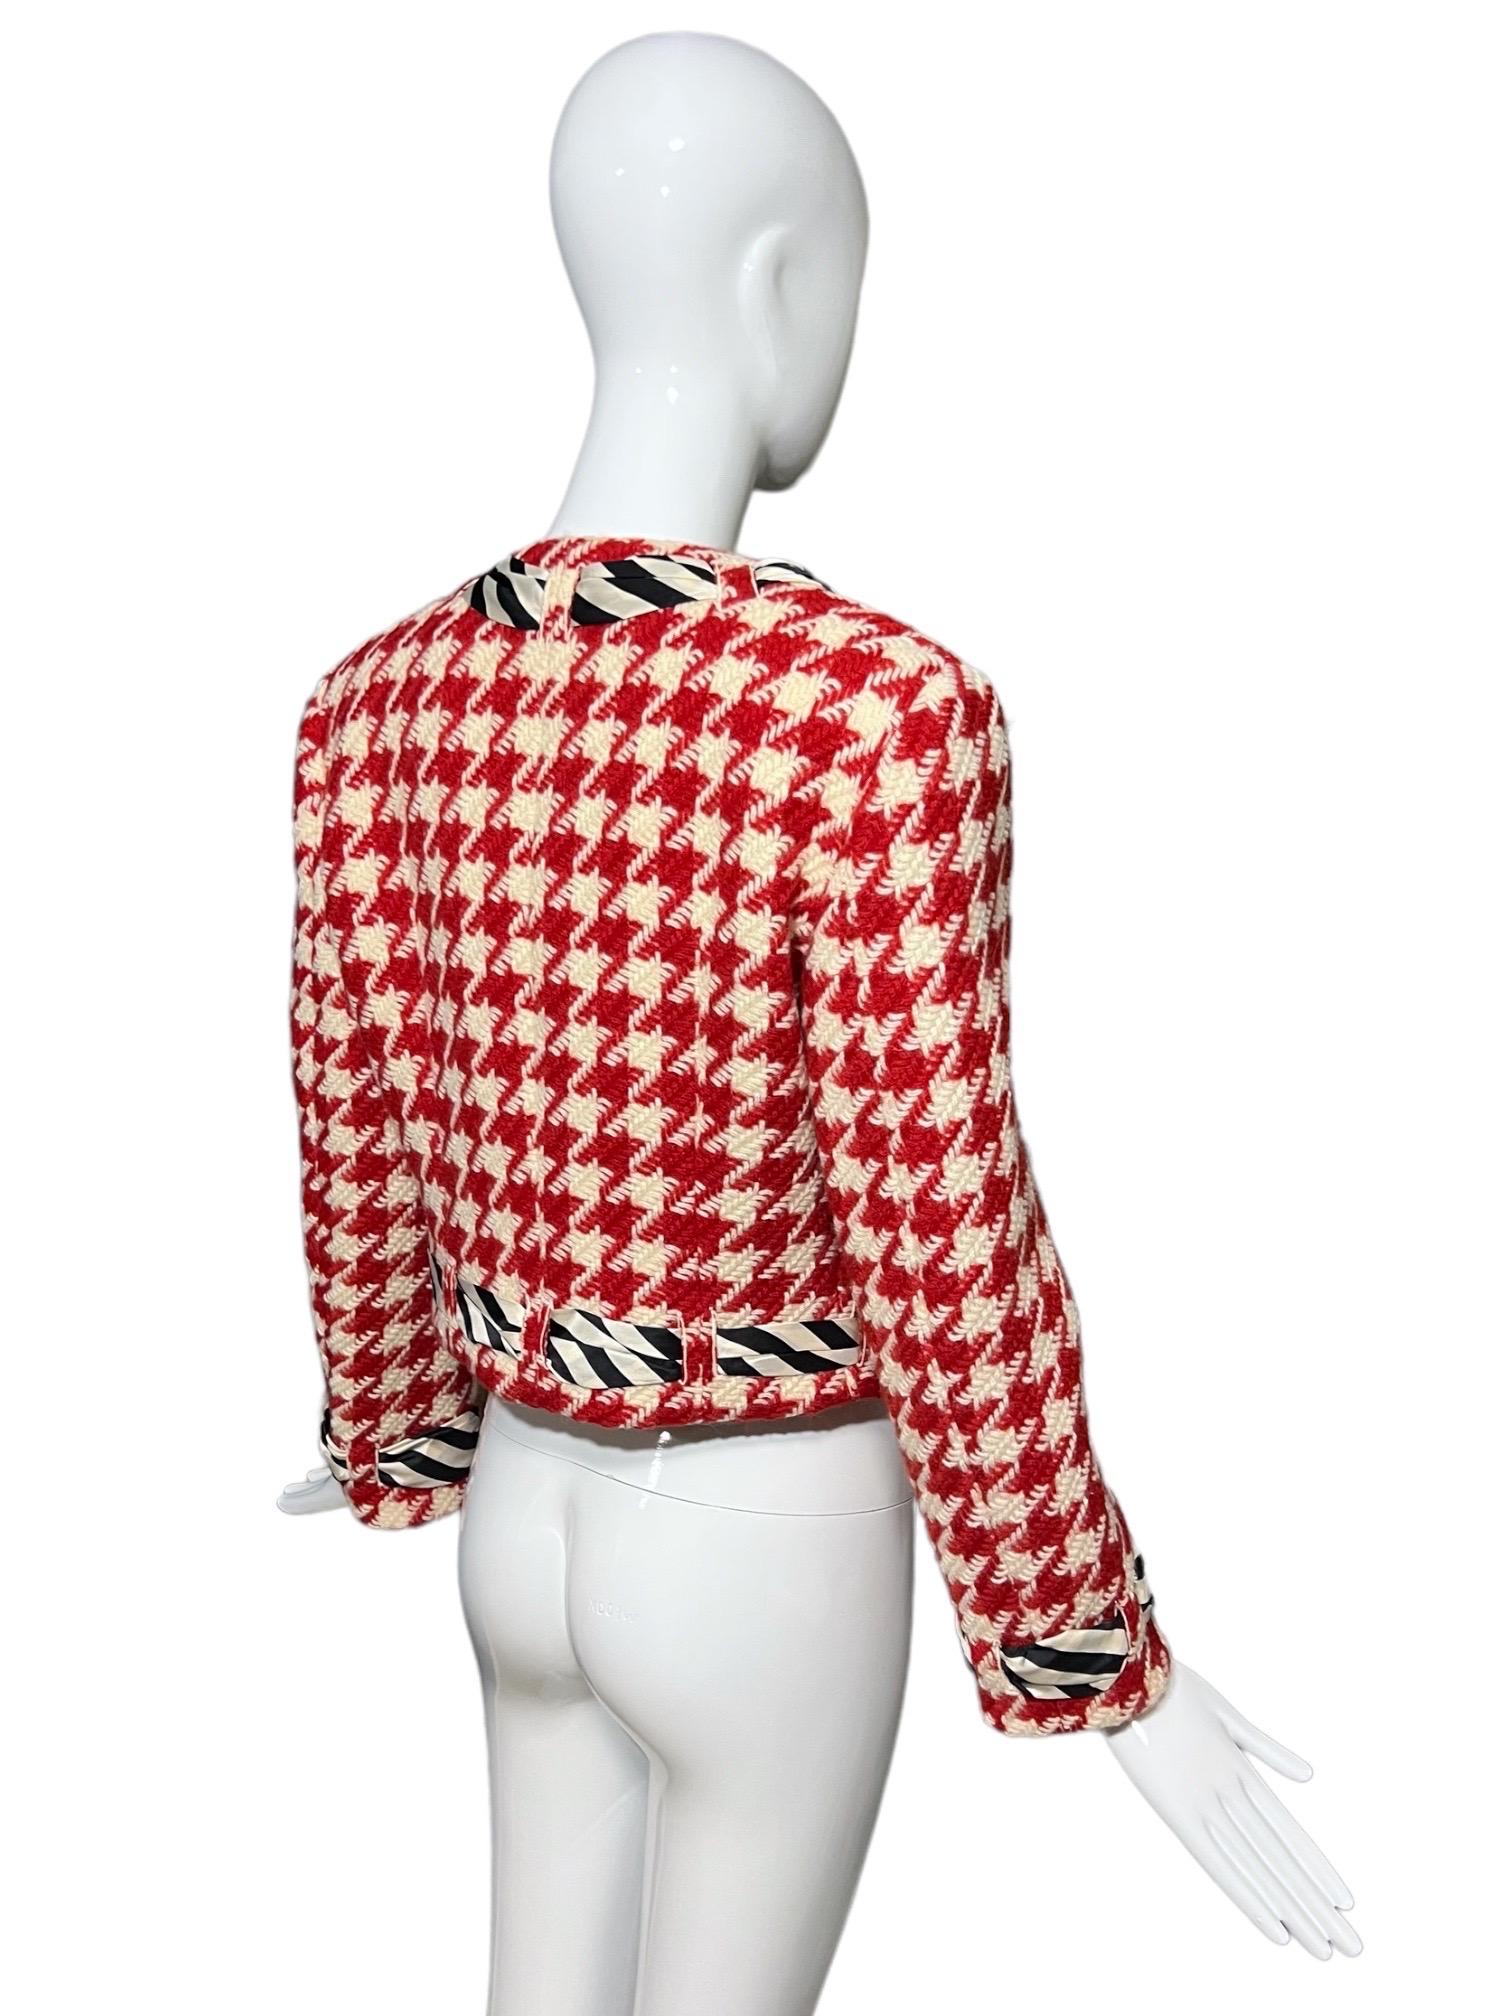 Moschino Cheap and Chic Vintage Houndstooth Jacket as seen on Princess Diana 3